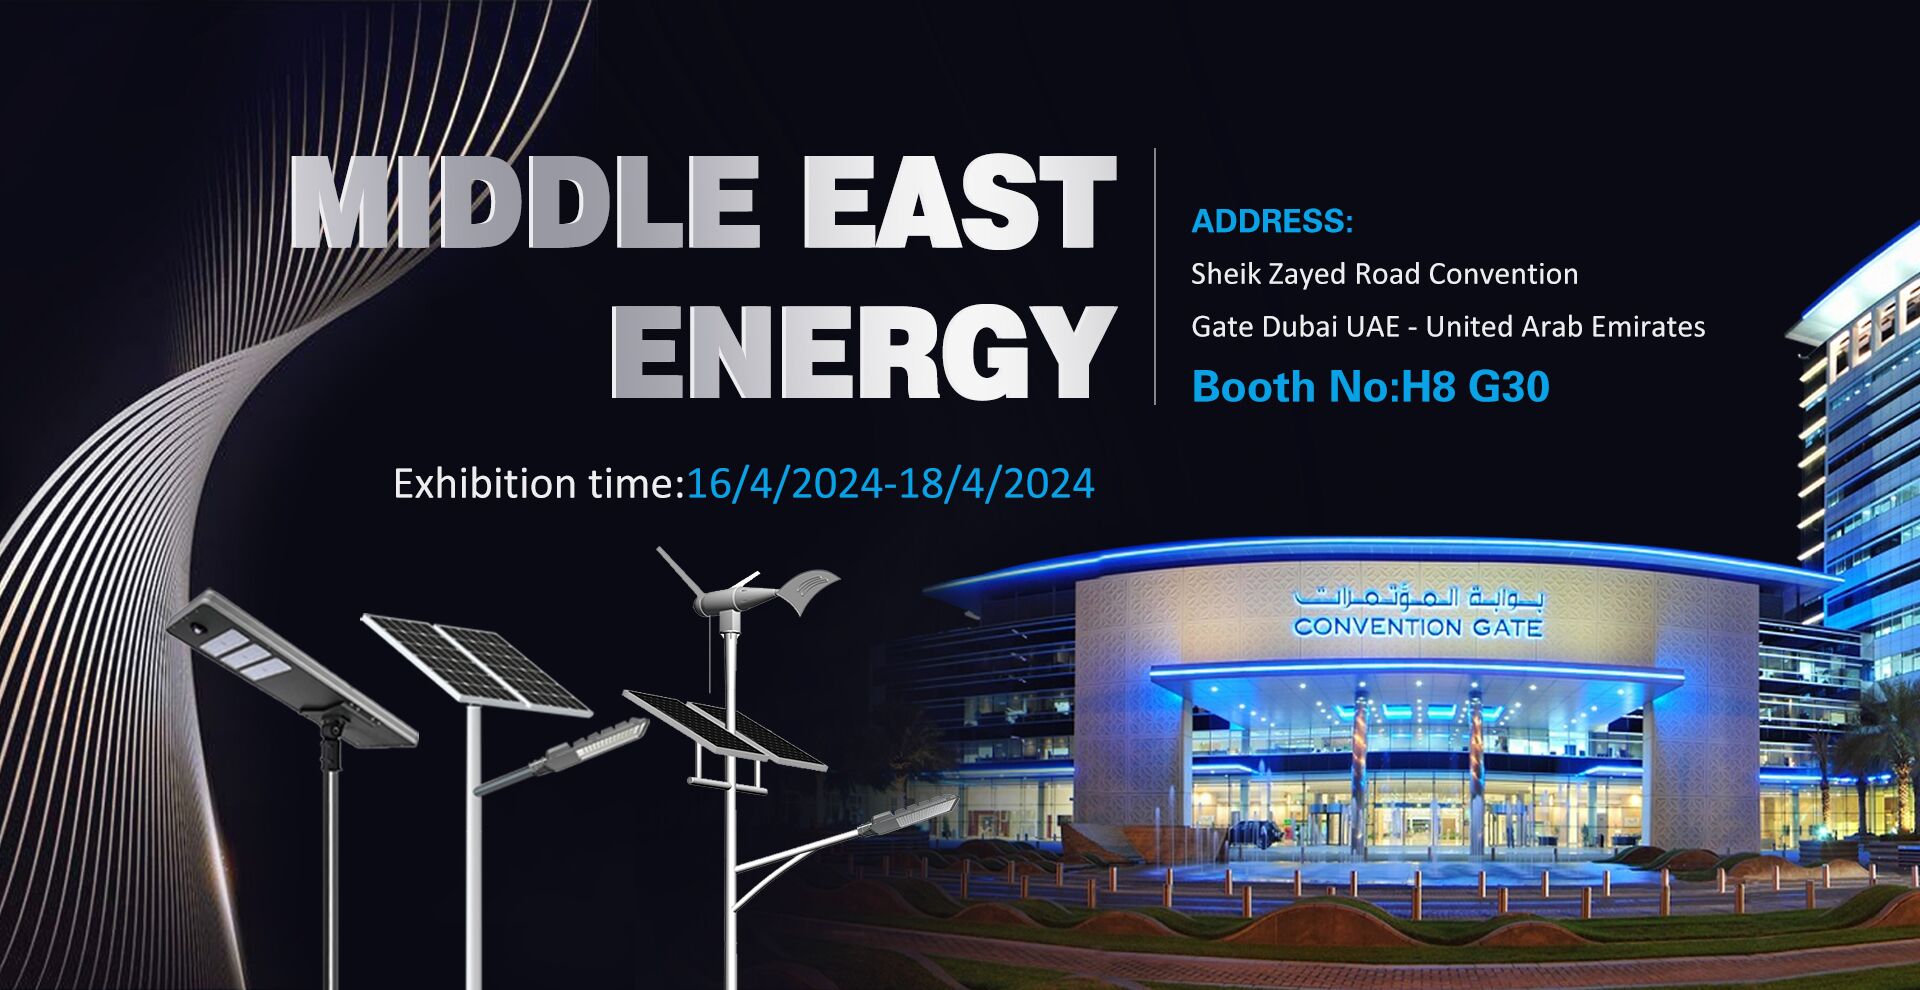 Coming soon: Middle East Energy